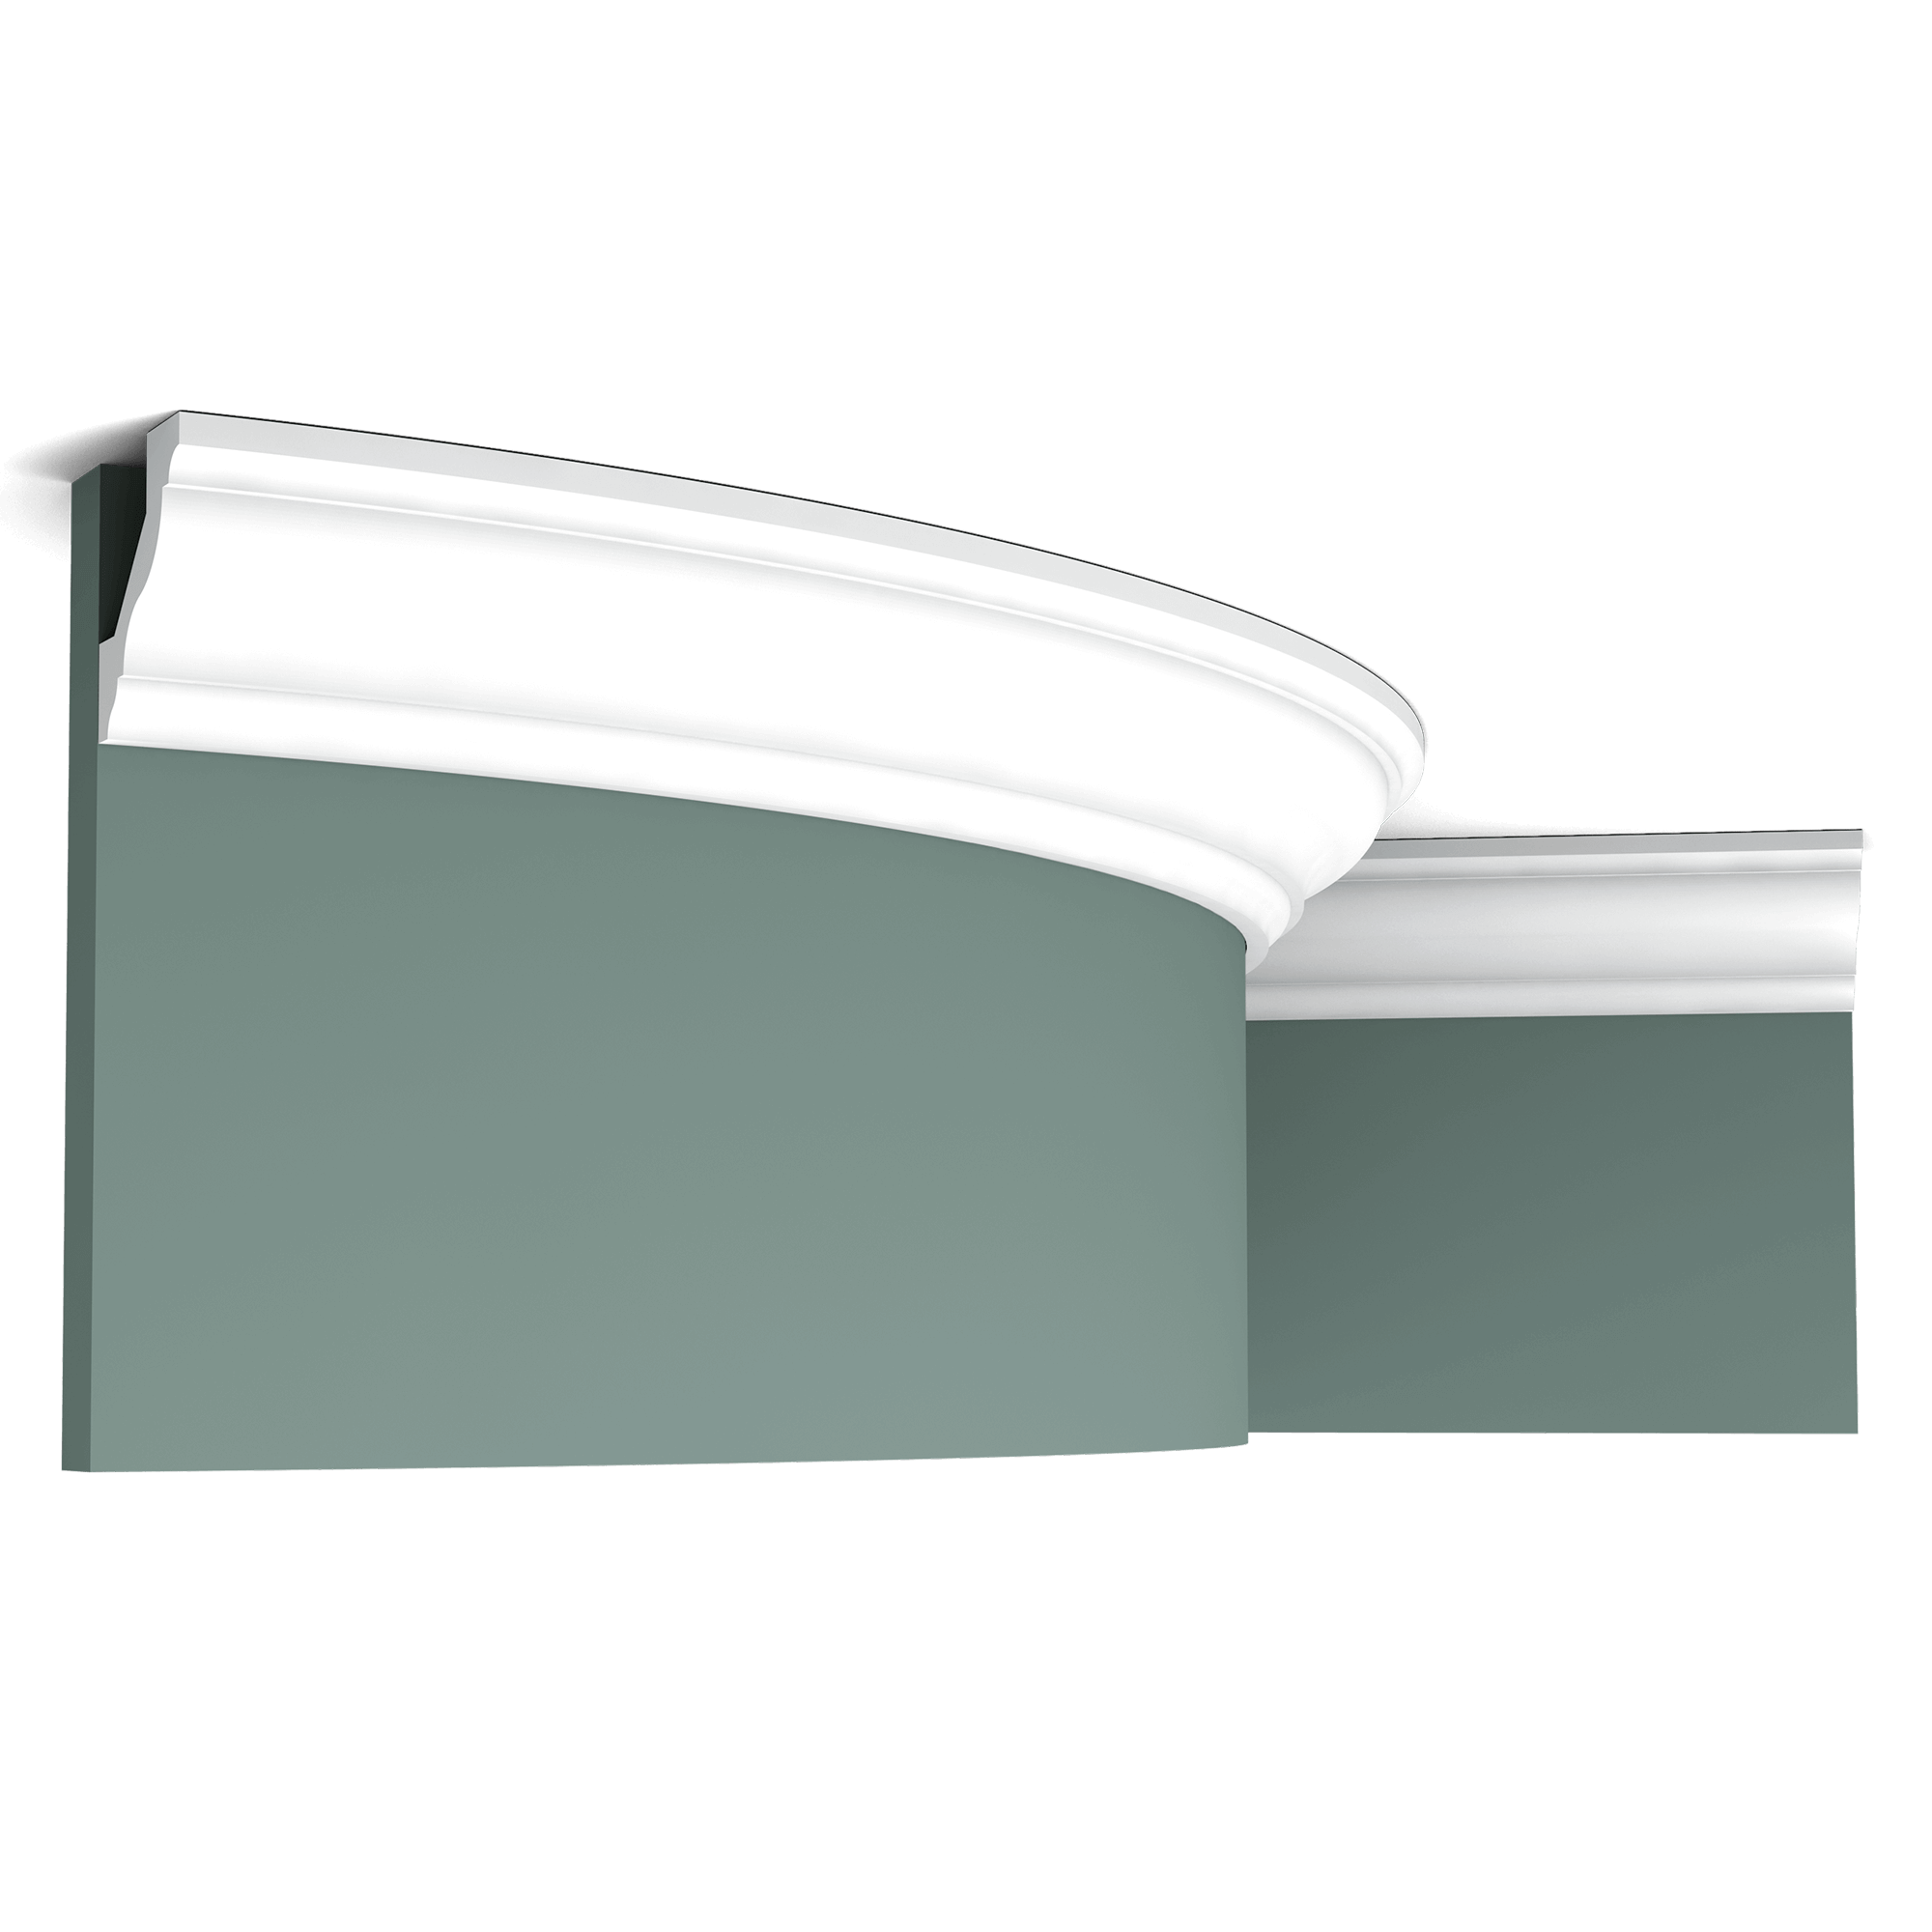 Flexible version of the CX110. This classic cornice moulding creates an elegant transition from wall to ceiling. Thanks to its Flex technology, curved walls and surfaces are no problem. Installation remark: It is necessary to screw this profile on the wall. Flex Radius: R min = 180 cm